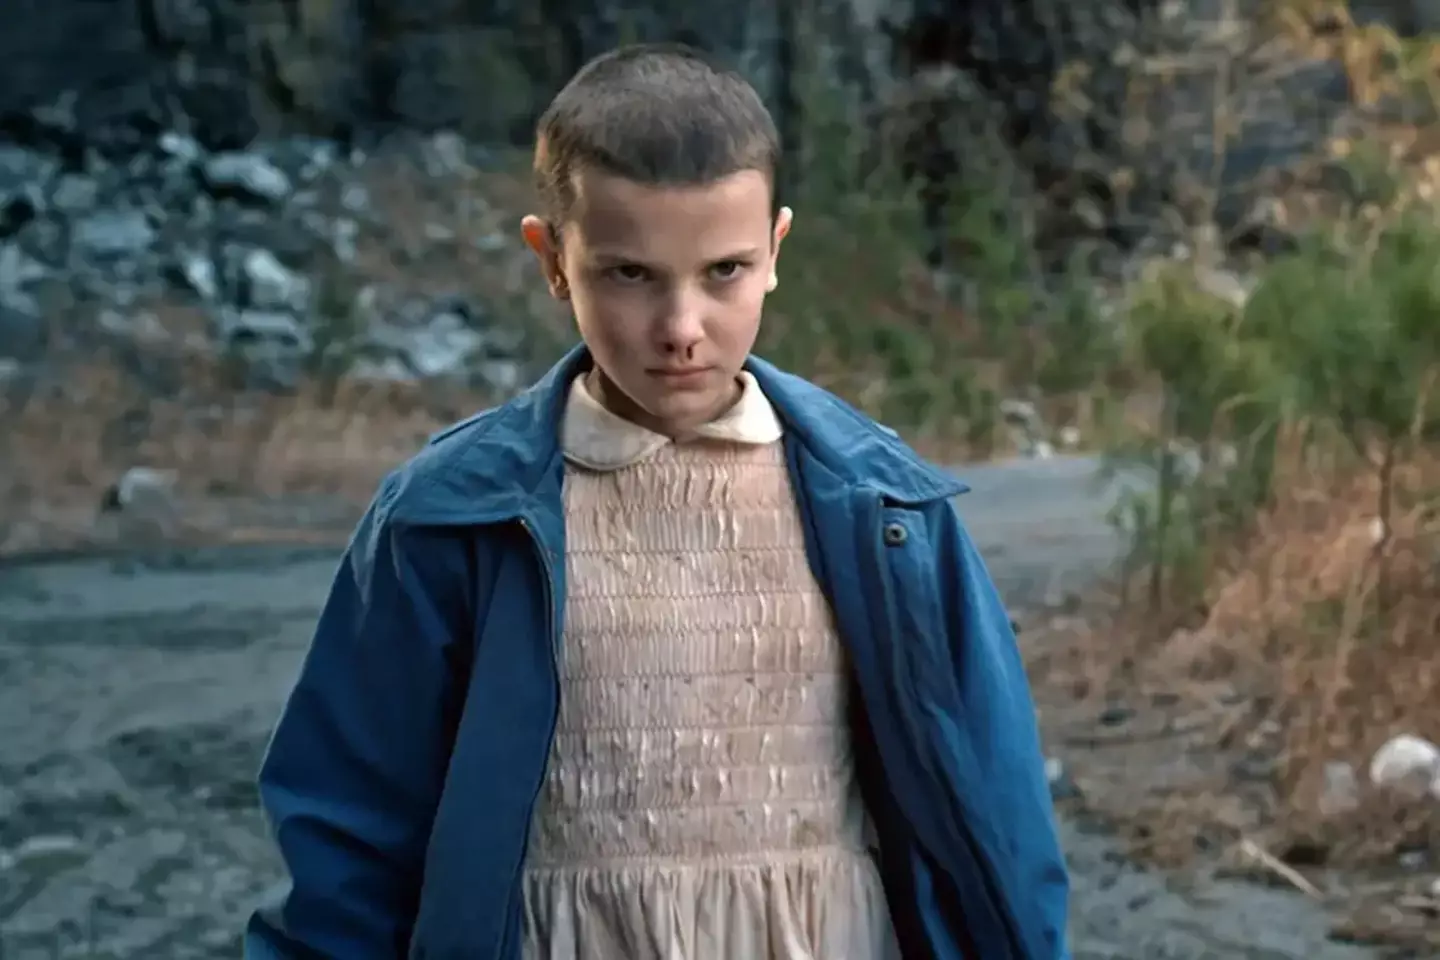 Millie Bobby Brown was around 14 when she shared her flat Earth thoughts.